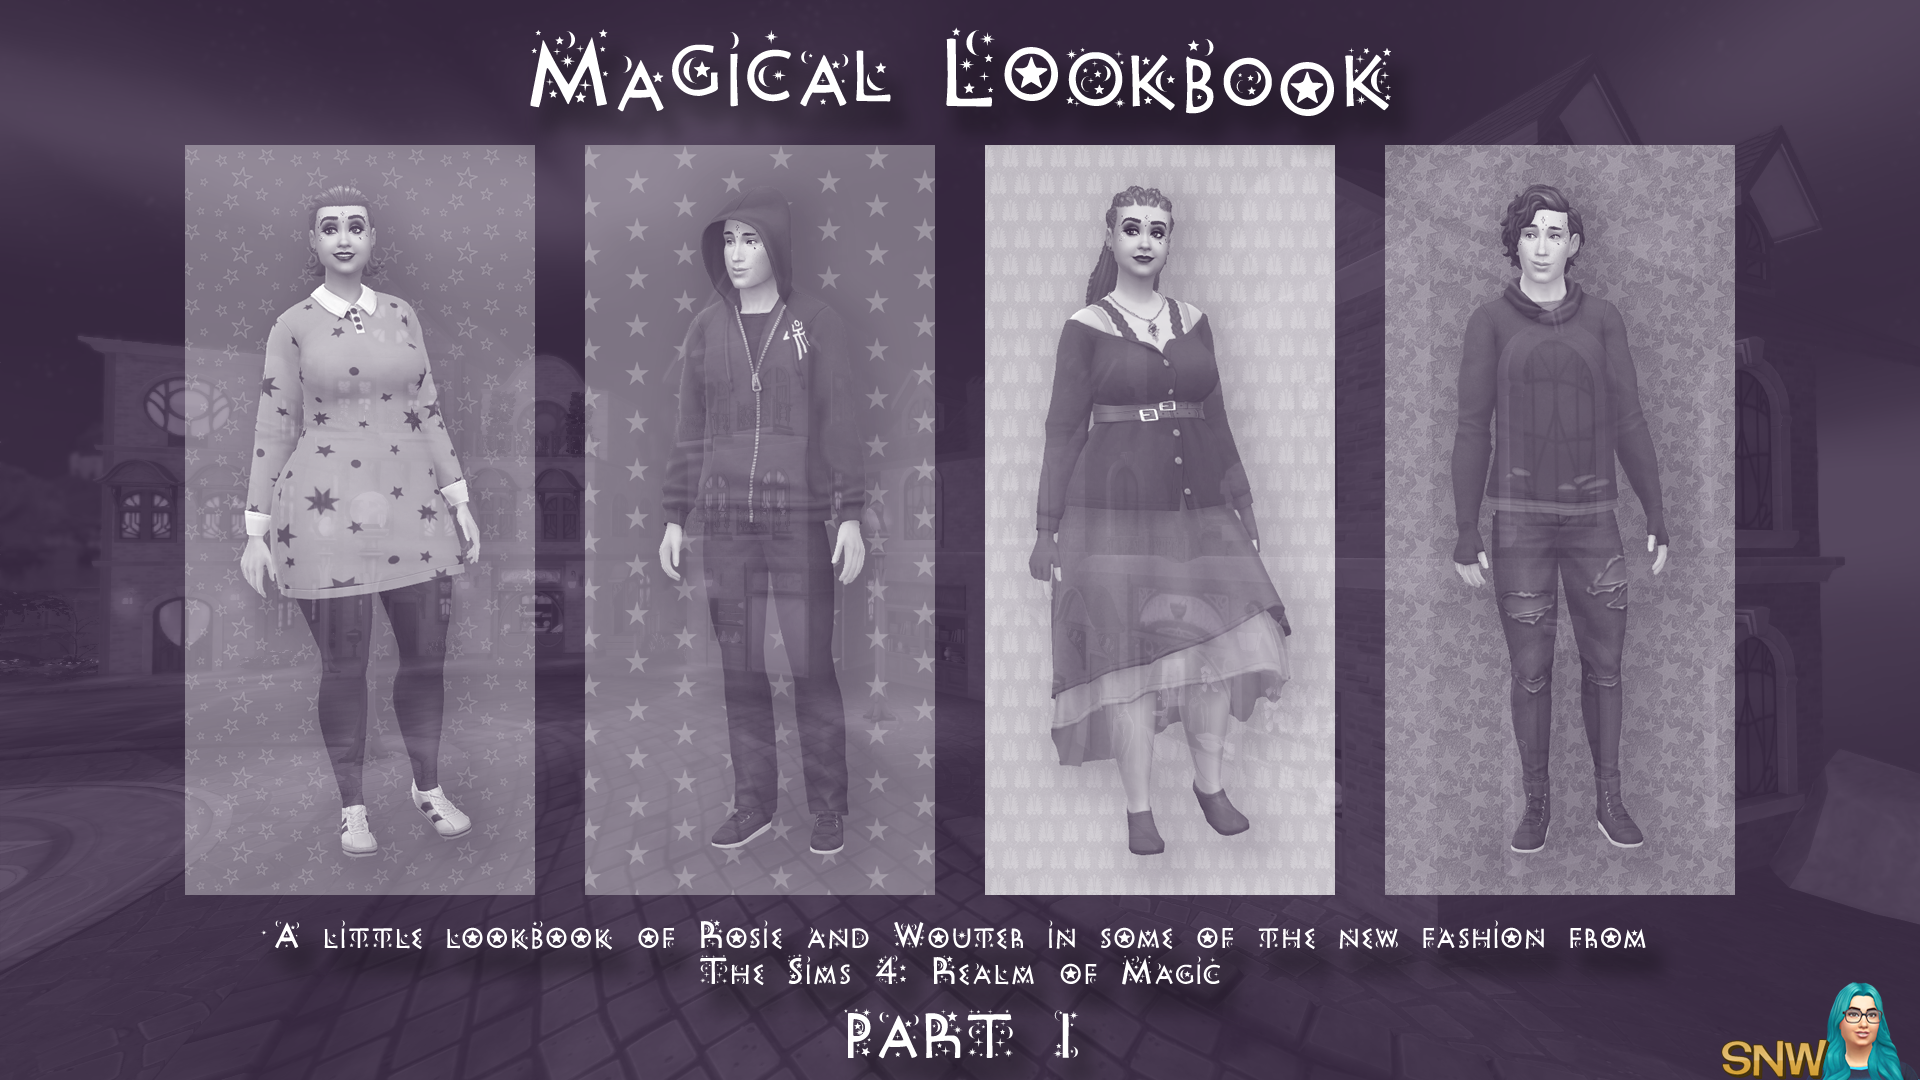 The Sims 4: Realm of Magic - A Little Lookbook by Rosie and Cheetah - Part 1